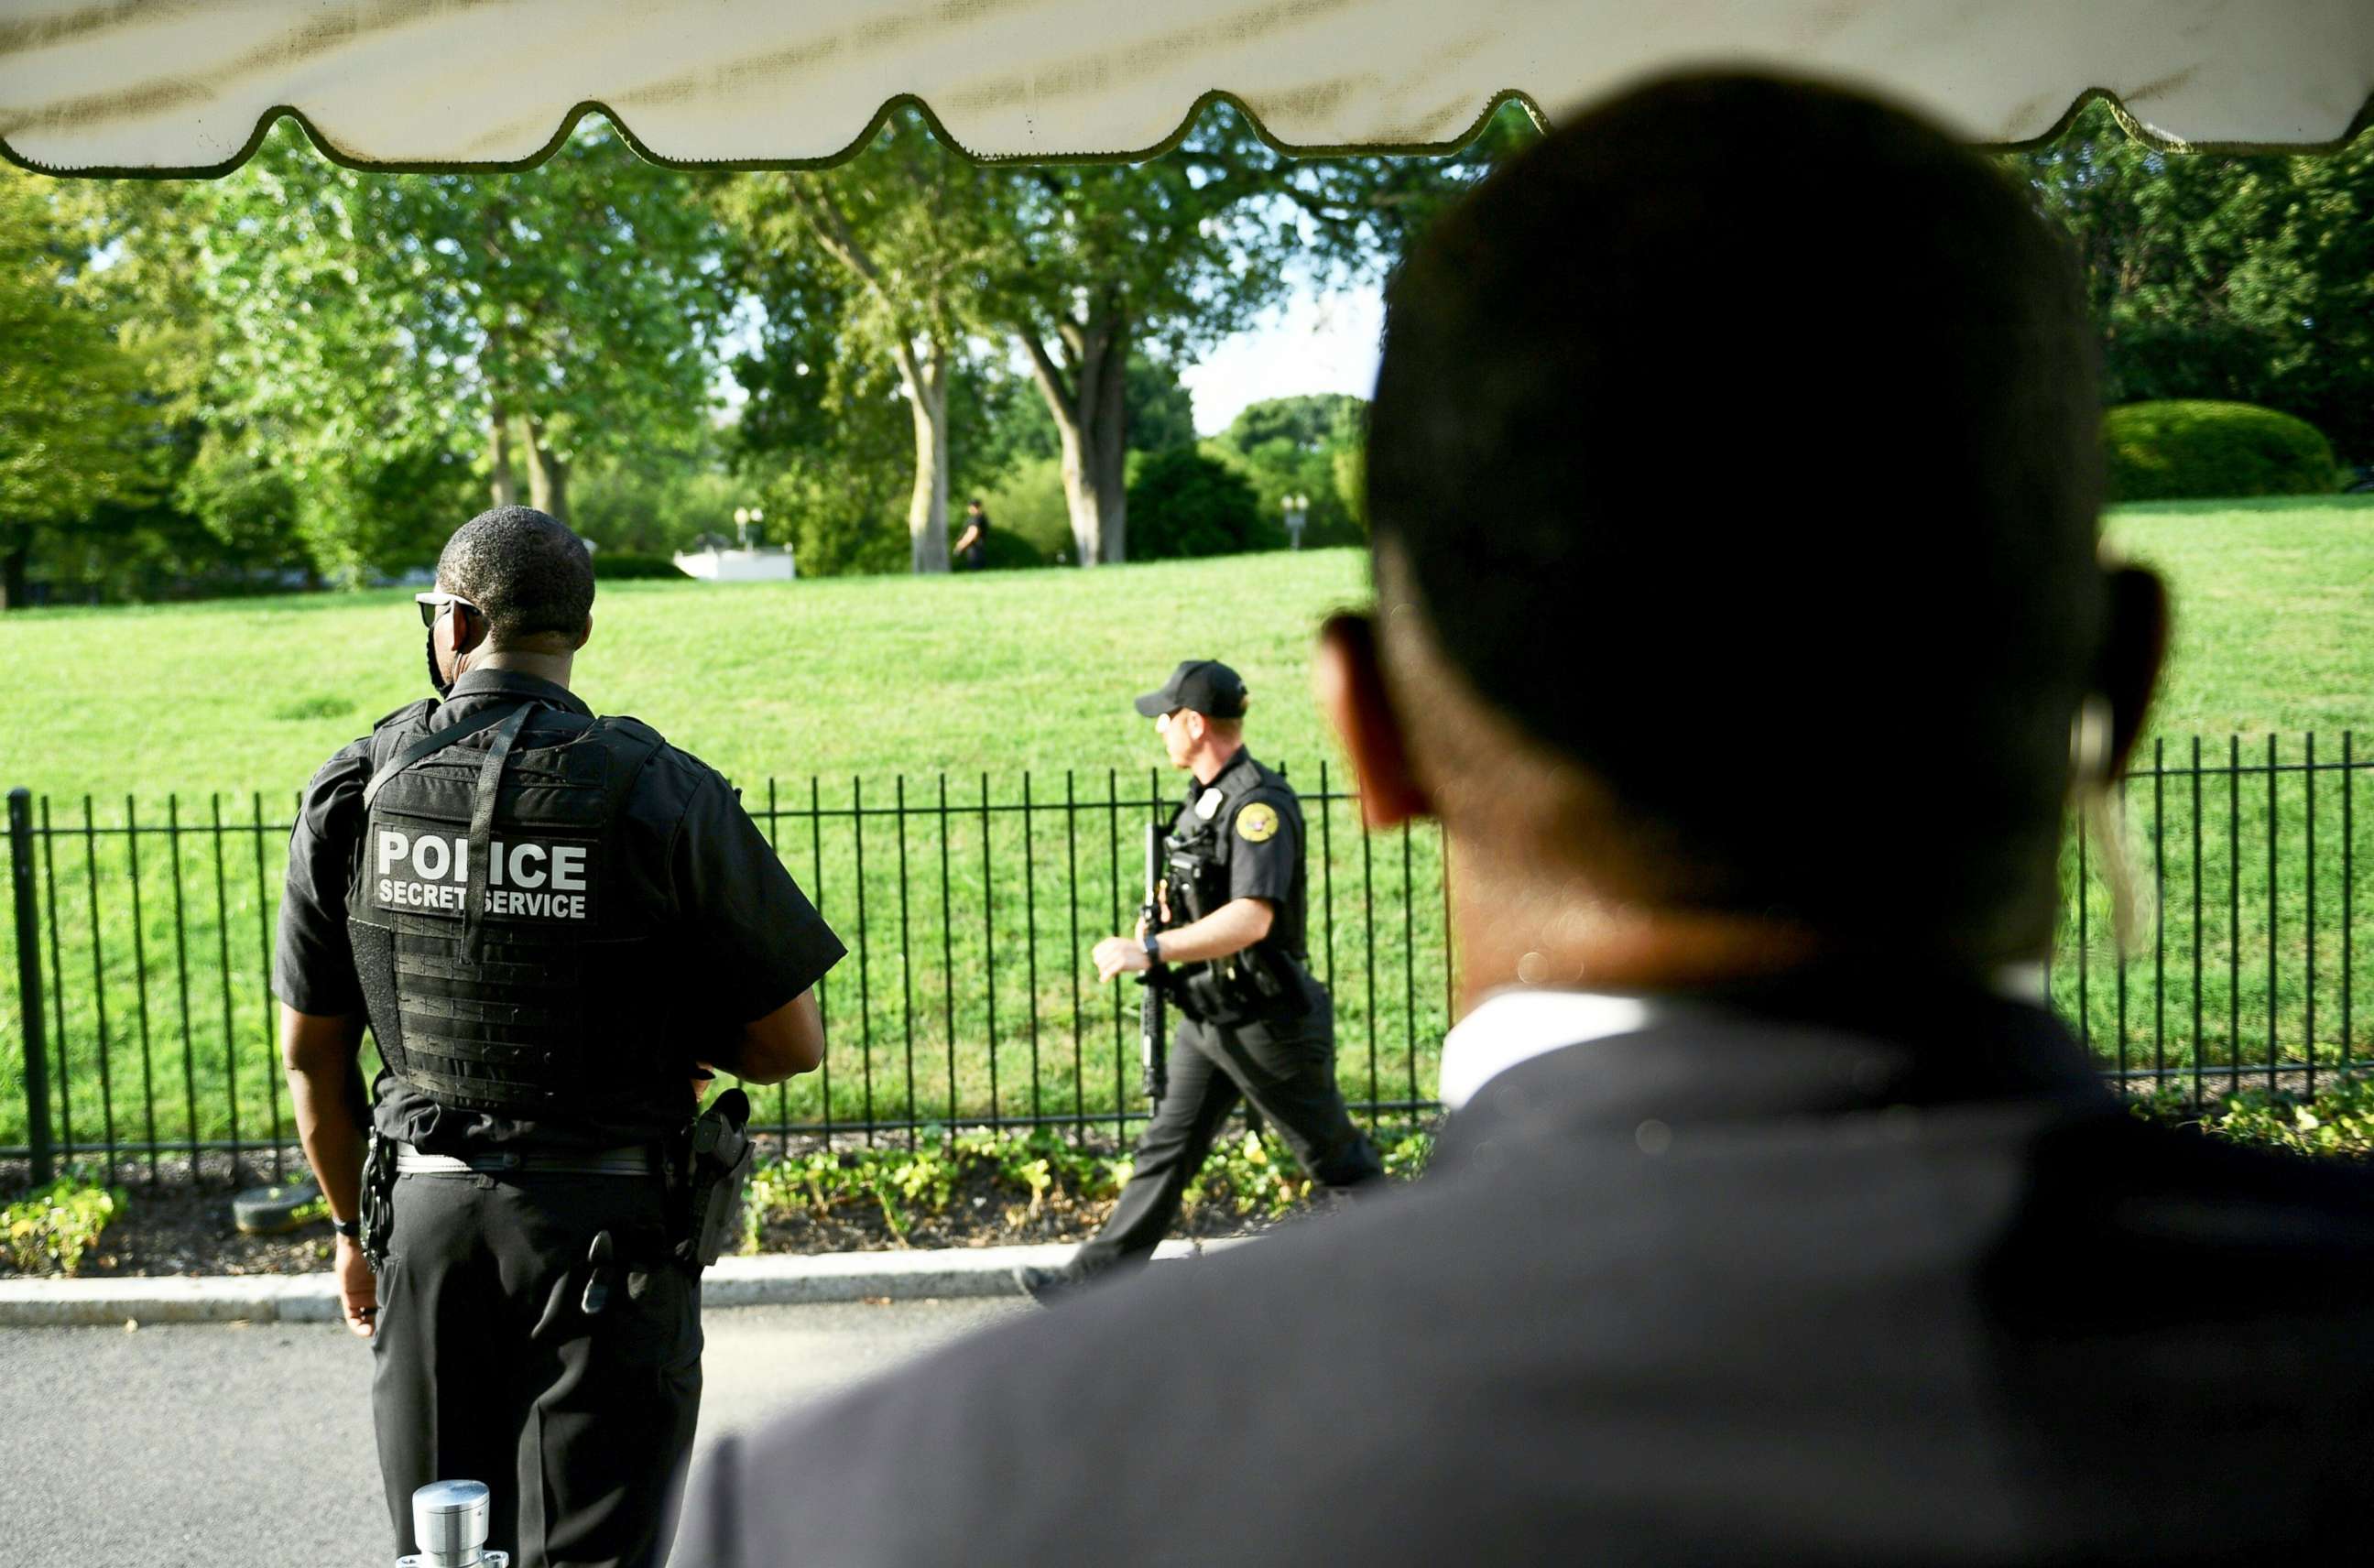 PHOTO: Members of the Secret Service take up position outside the Brady Briefing Room as the White House is locked down in Washington, DC, on Aug. 10, 2020.